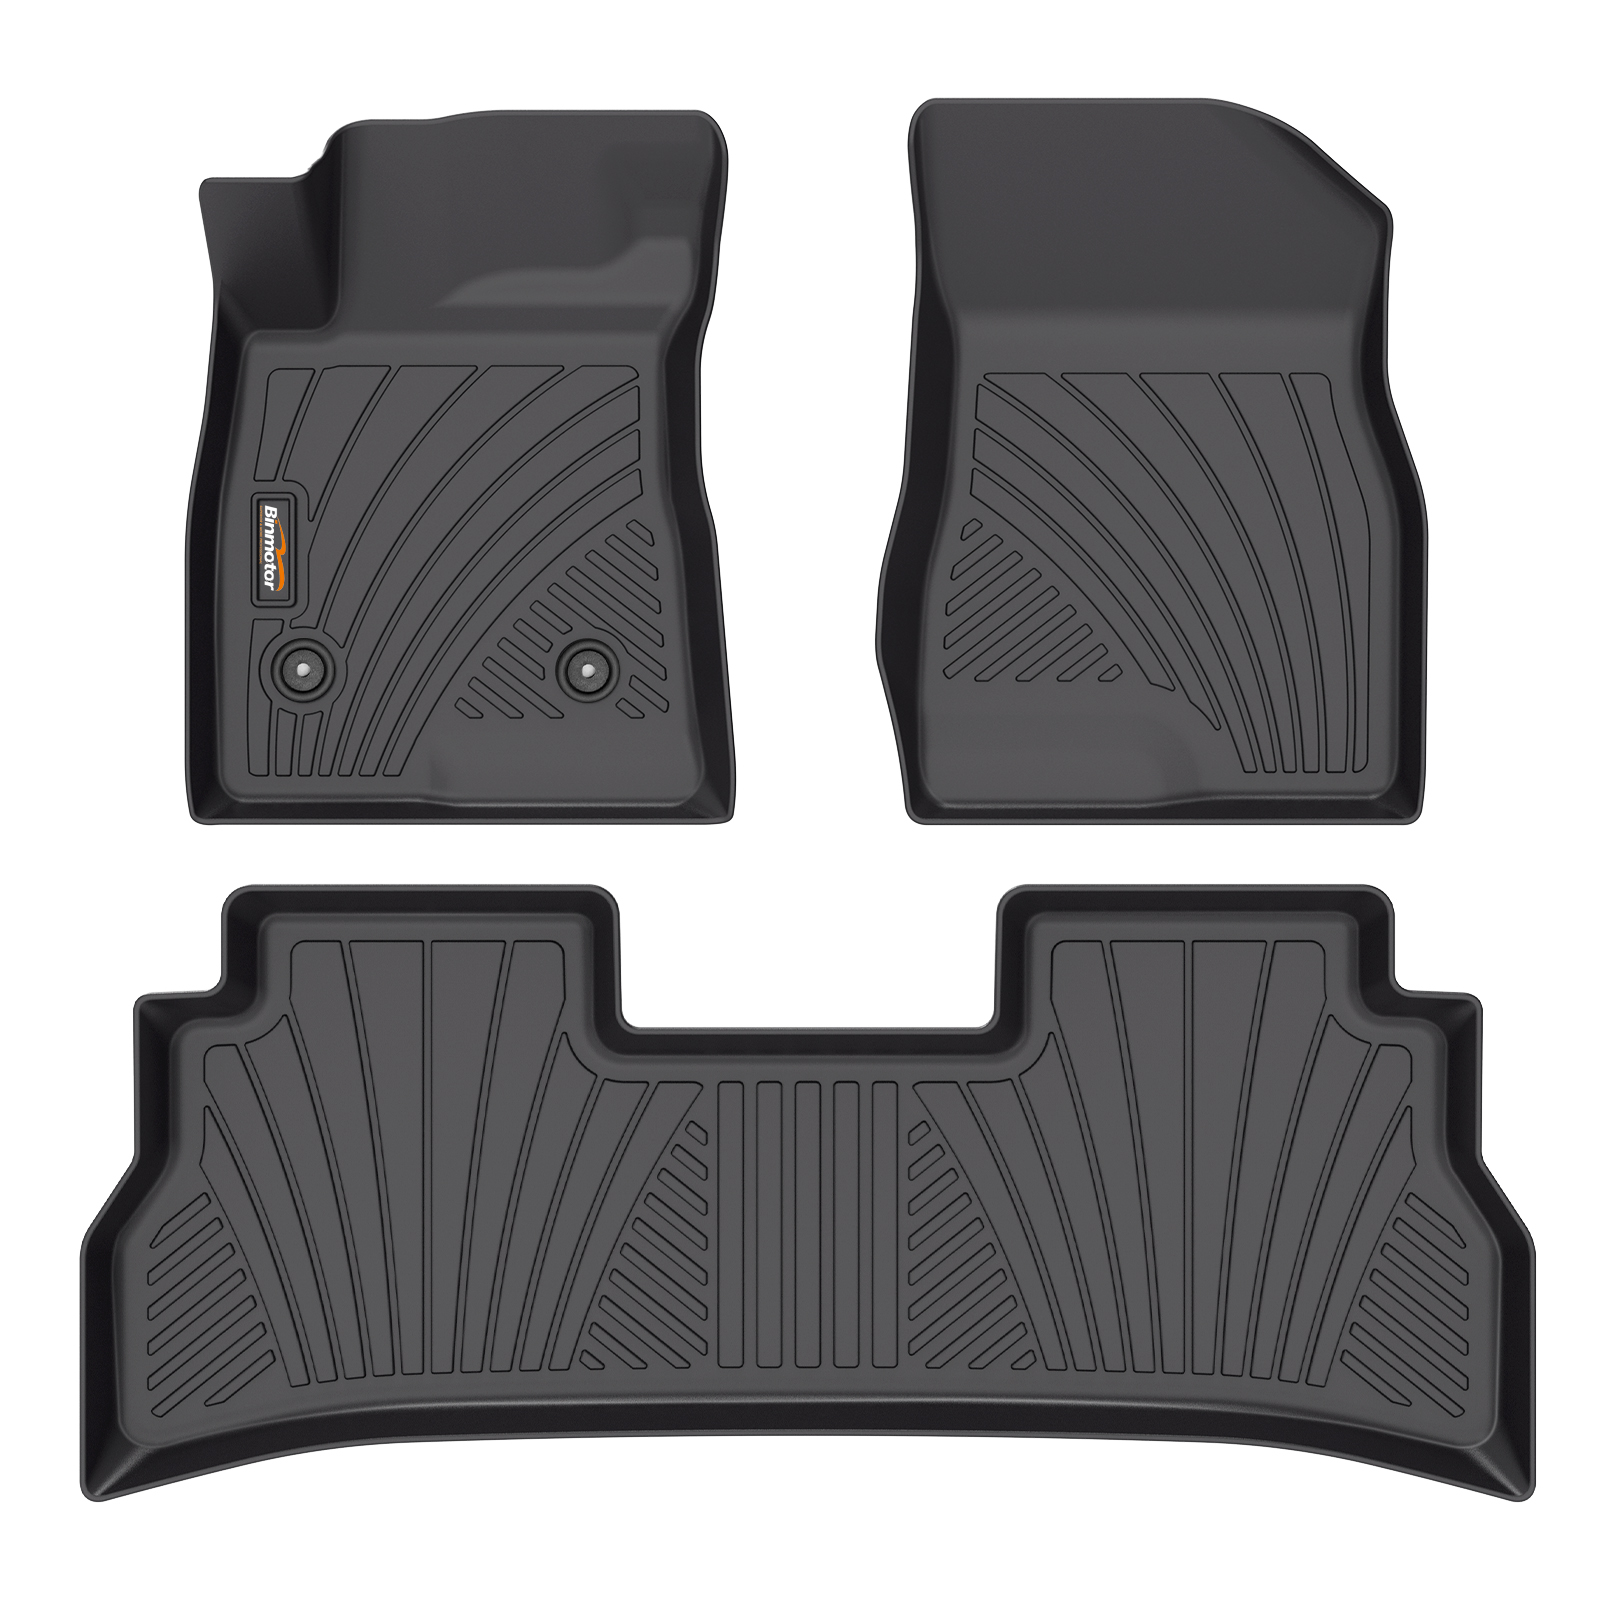 Binmotor-Floor Mats for Chevy/Chevrolet Trax丨TPE Rubber Floor Mat Chevy Trax丨All Weather Car Floor Mats for Trax丨Chevrolet Trax Accessories（compatible year 2023-2024）